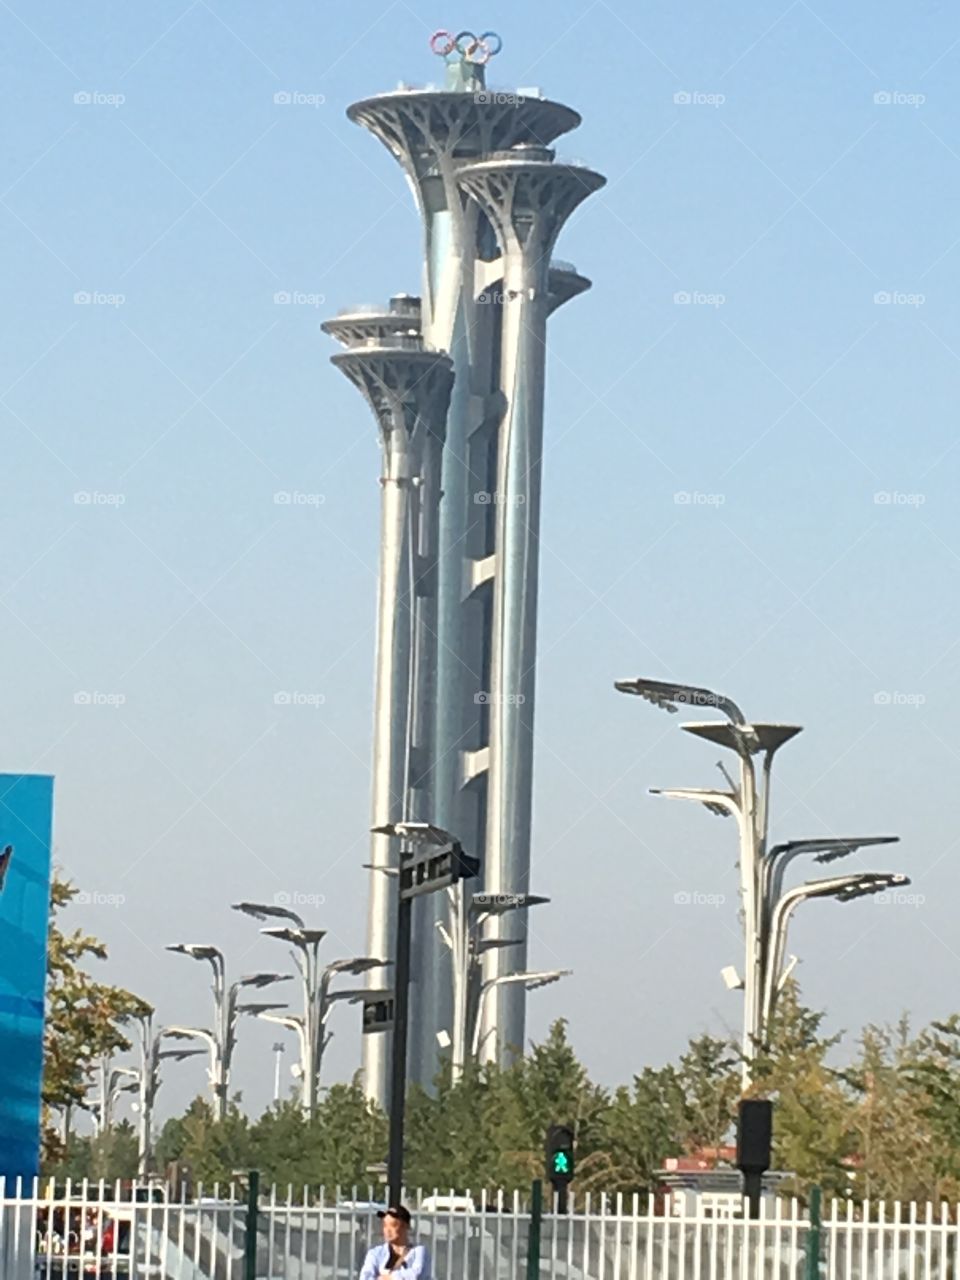 Tower at Olympic Park in Beijing, China